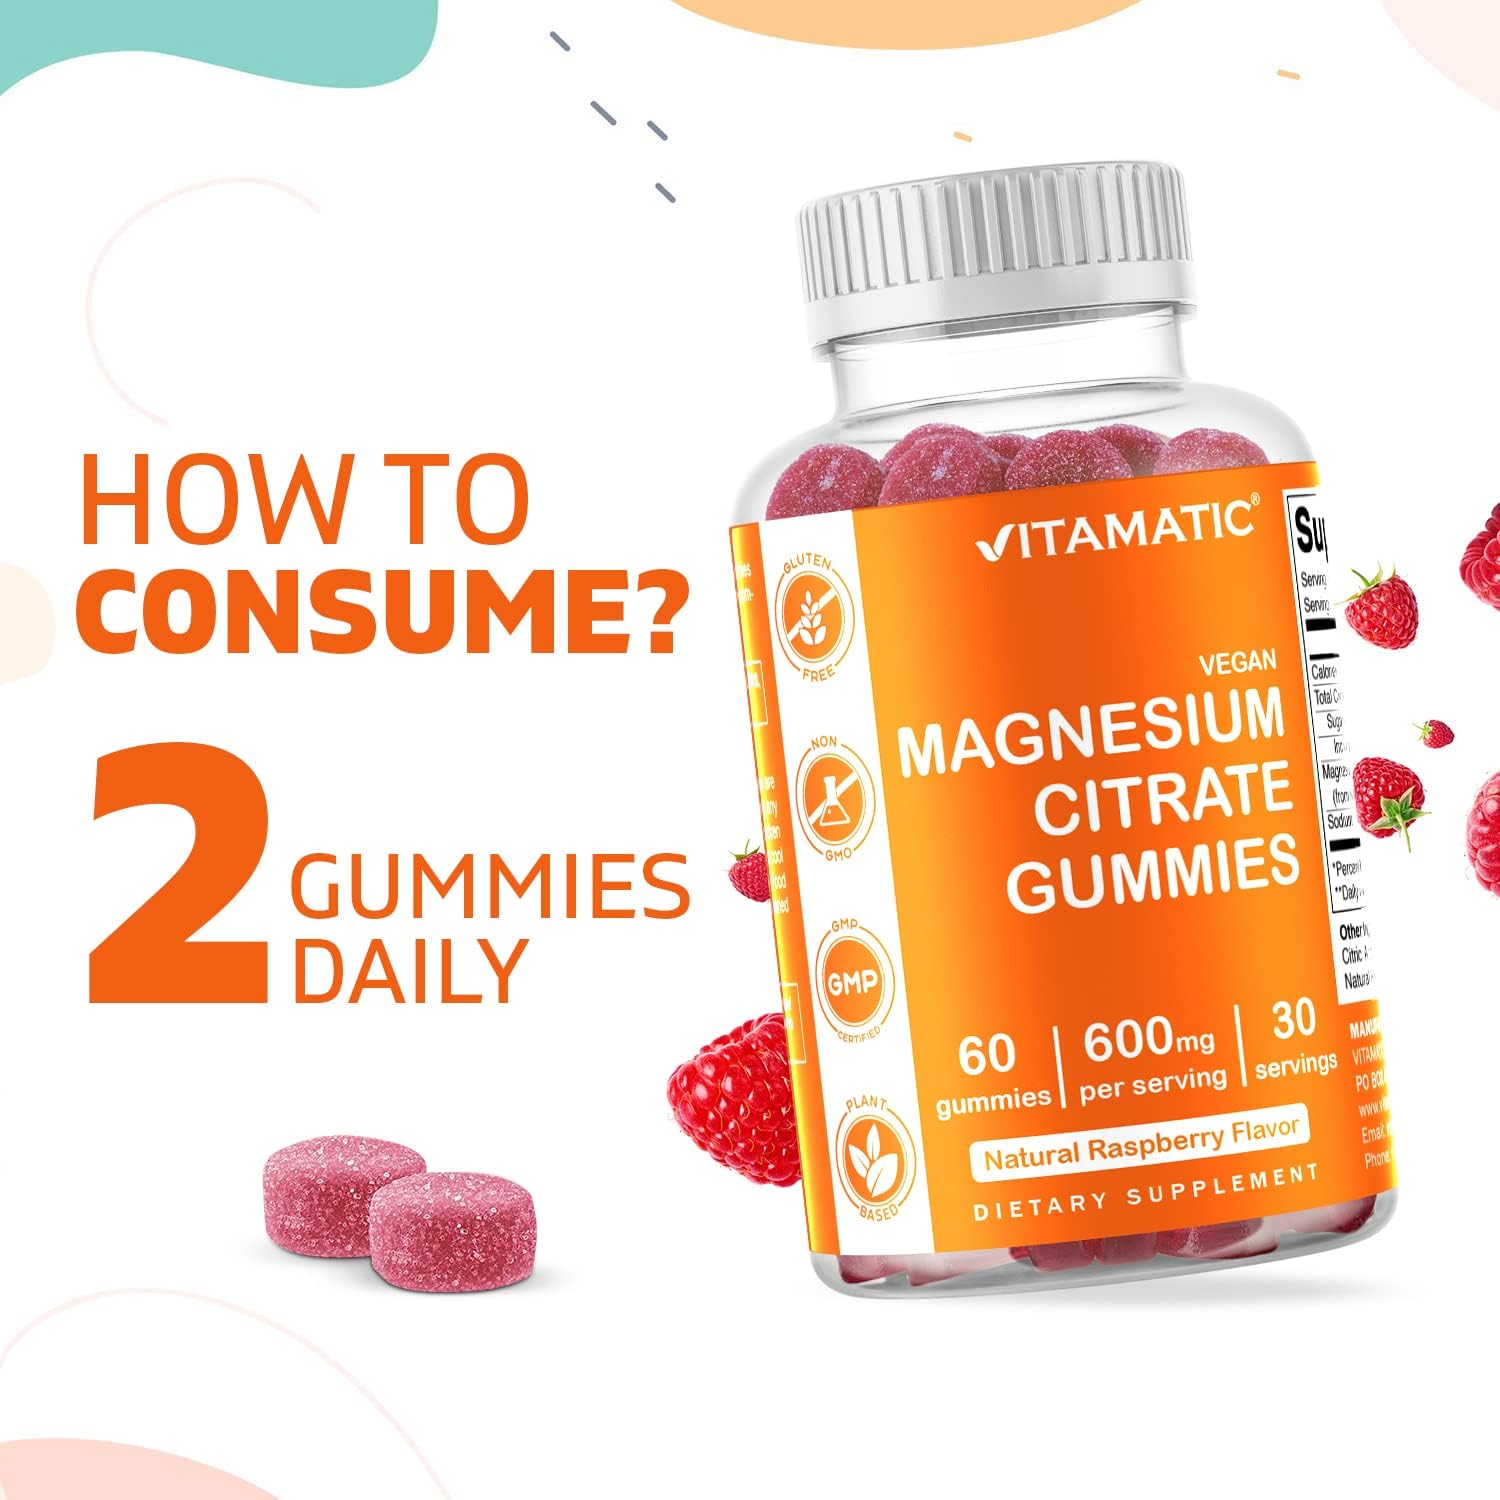 Vitamatic Magnesium Citrate Gummies 600mg per Serving - 60 Vegan Gummies - Promotes Healthy Relaxation, Muscle, Bone, & Energy Support (60 Gummies (Pack of 1)) : Health & Household